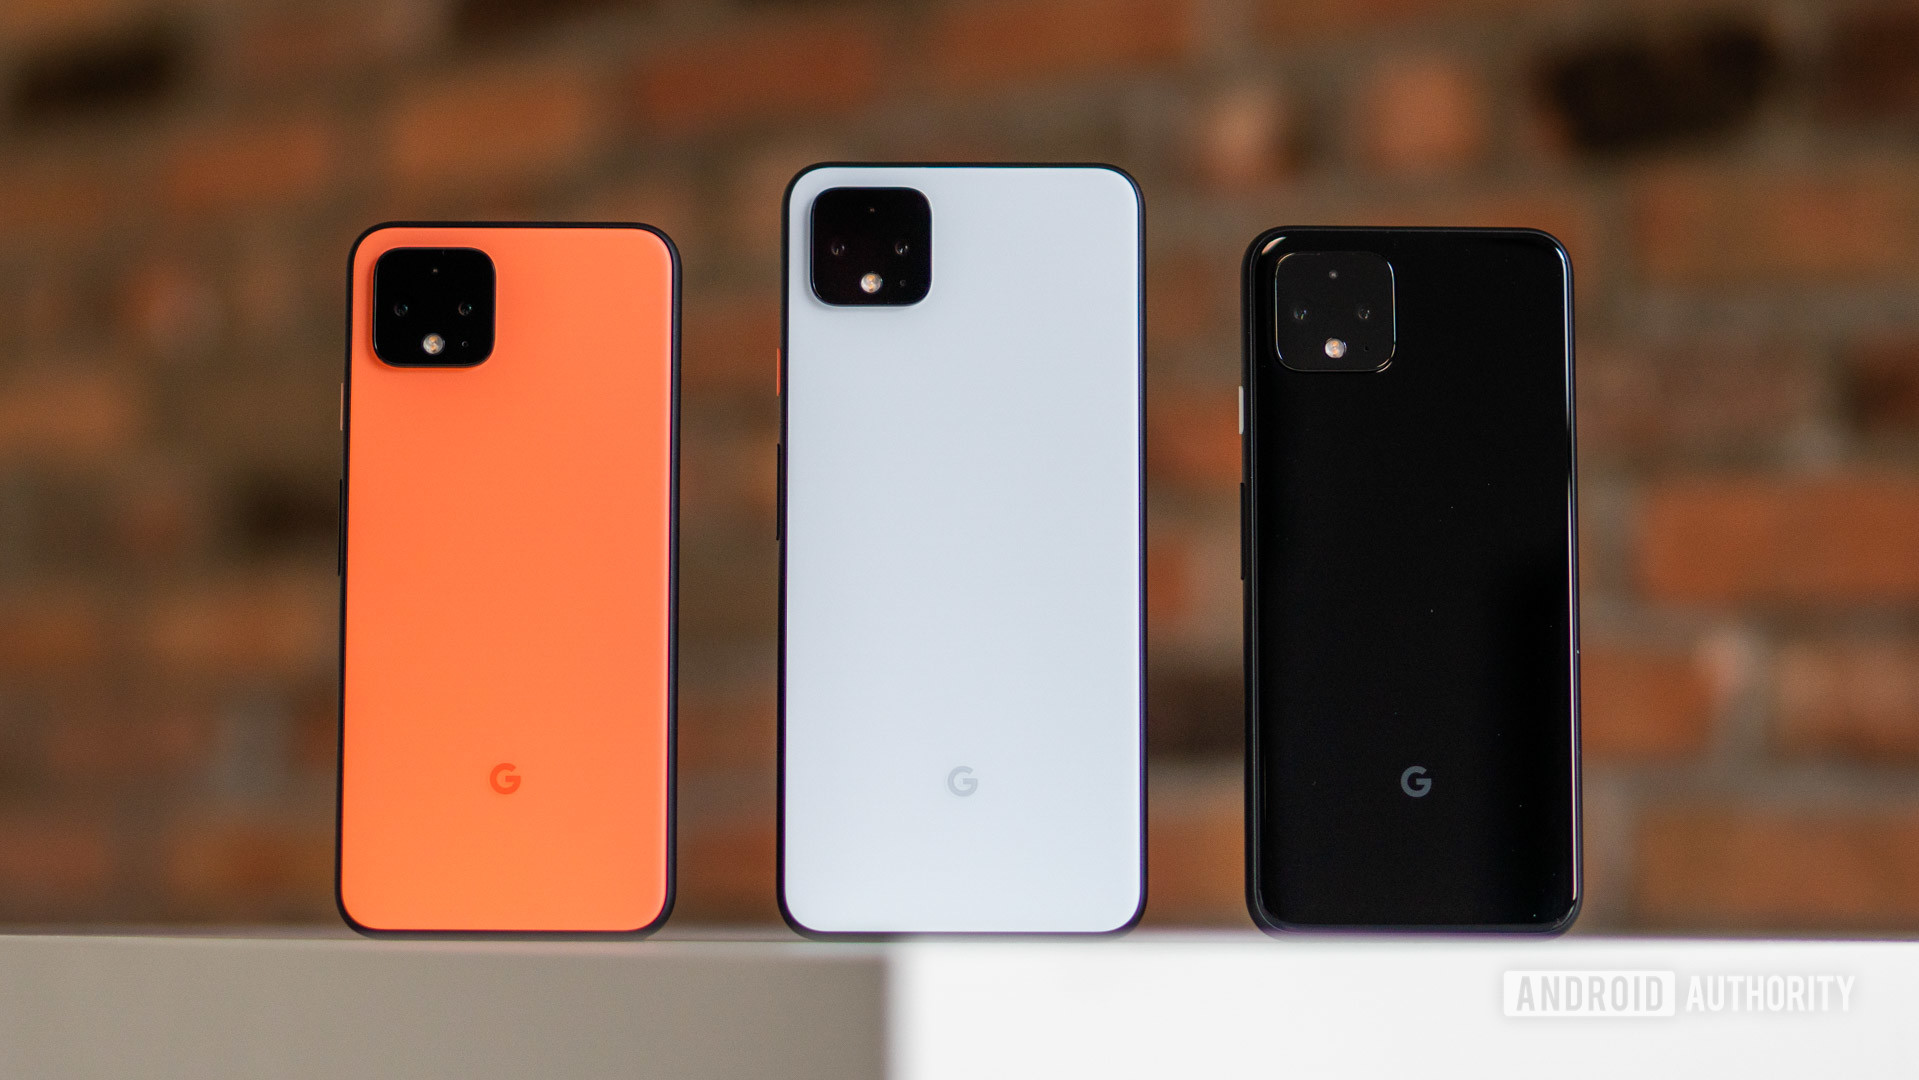 Google Pixel 4 and Pixel 4 XL sizes and colors